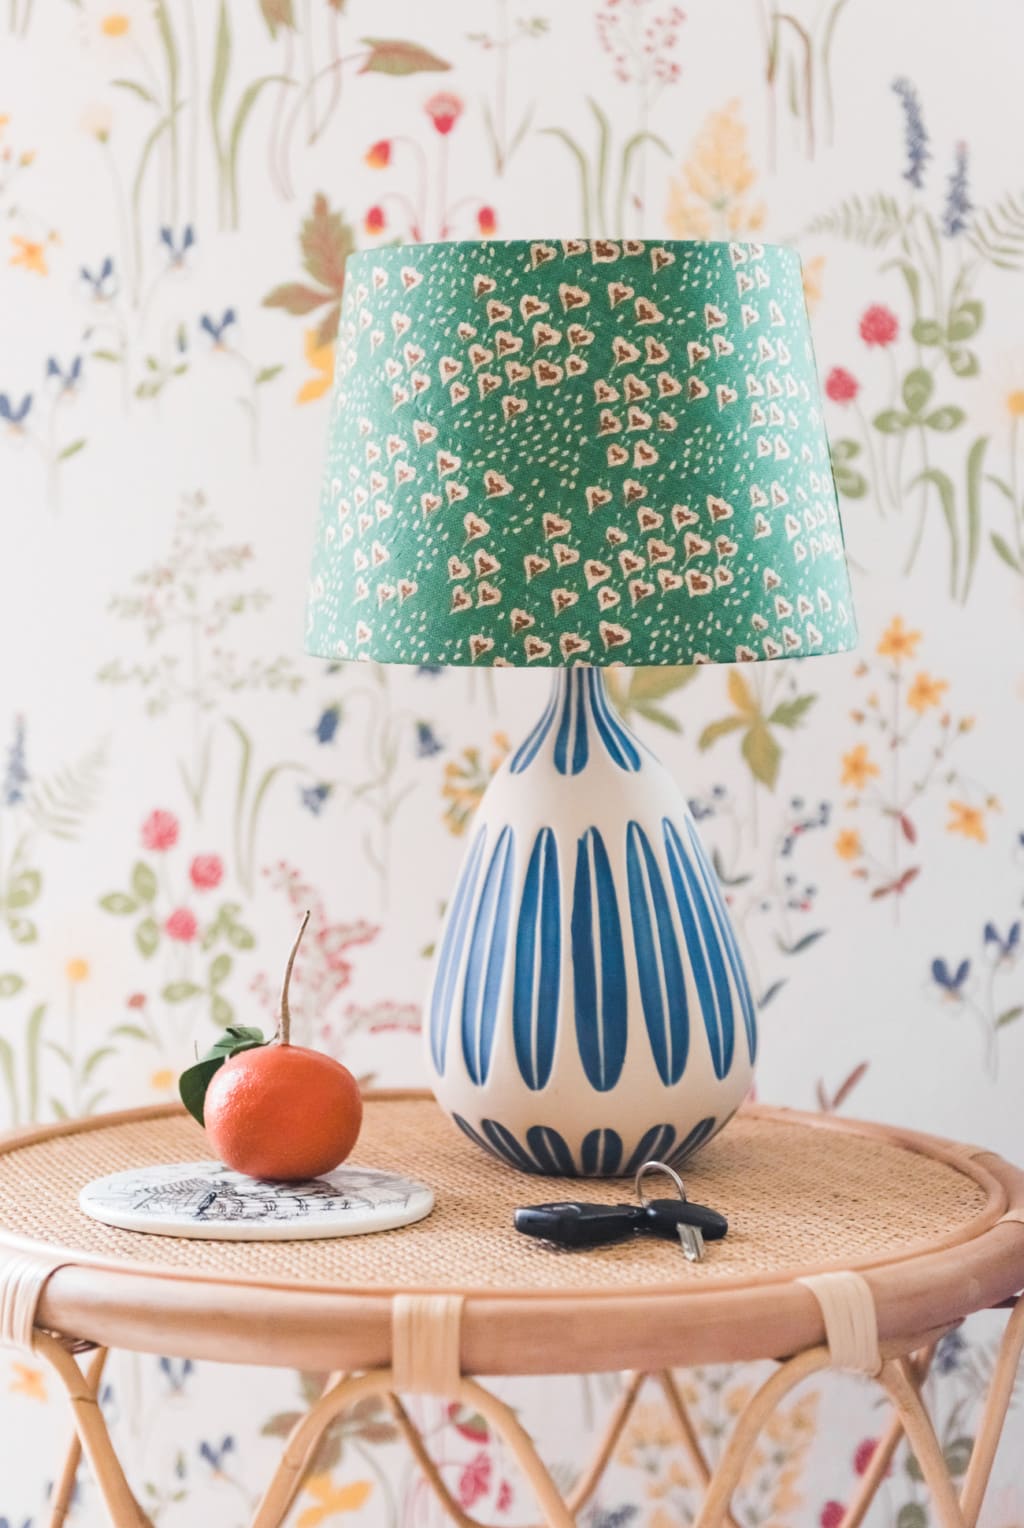 3 Diy Lampshades Made With Unexpected, What Material To Use Make A Lampshade